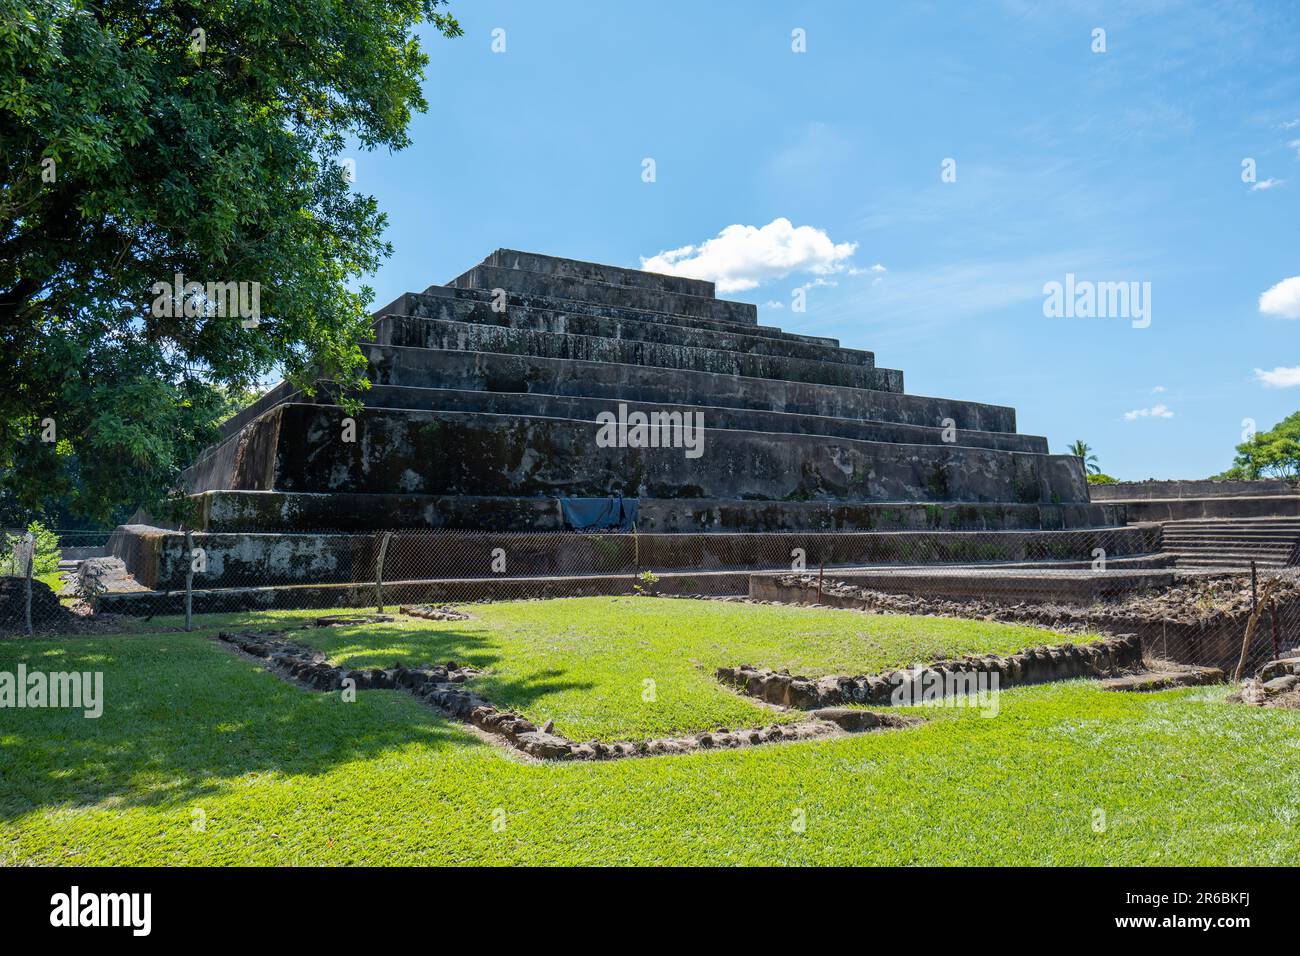 Main Structure of the Mayan Pyramids of Tazumal Site in Salvador, an Important Historical Trading Center for the Maya with Tombs and Several Pyramids Stock Photo